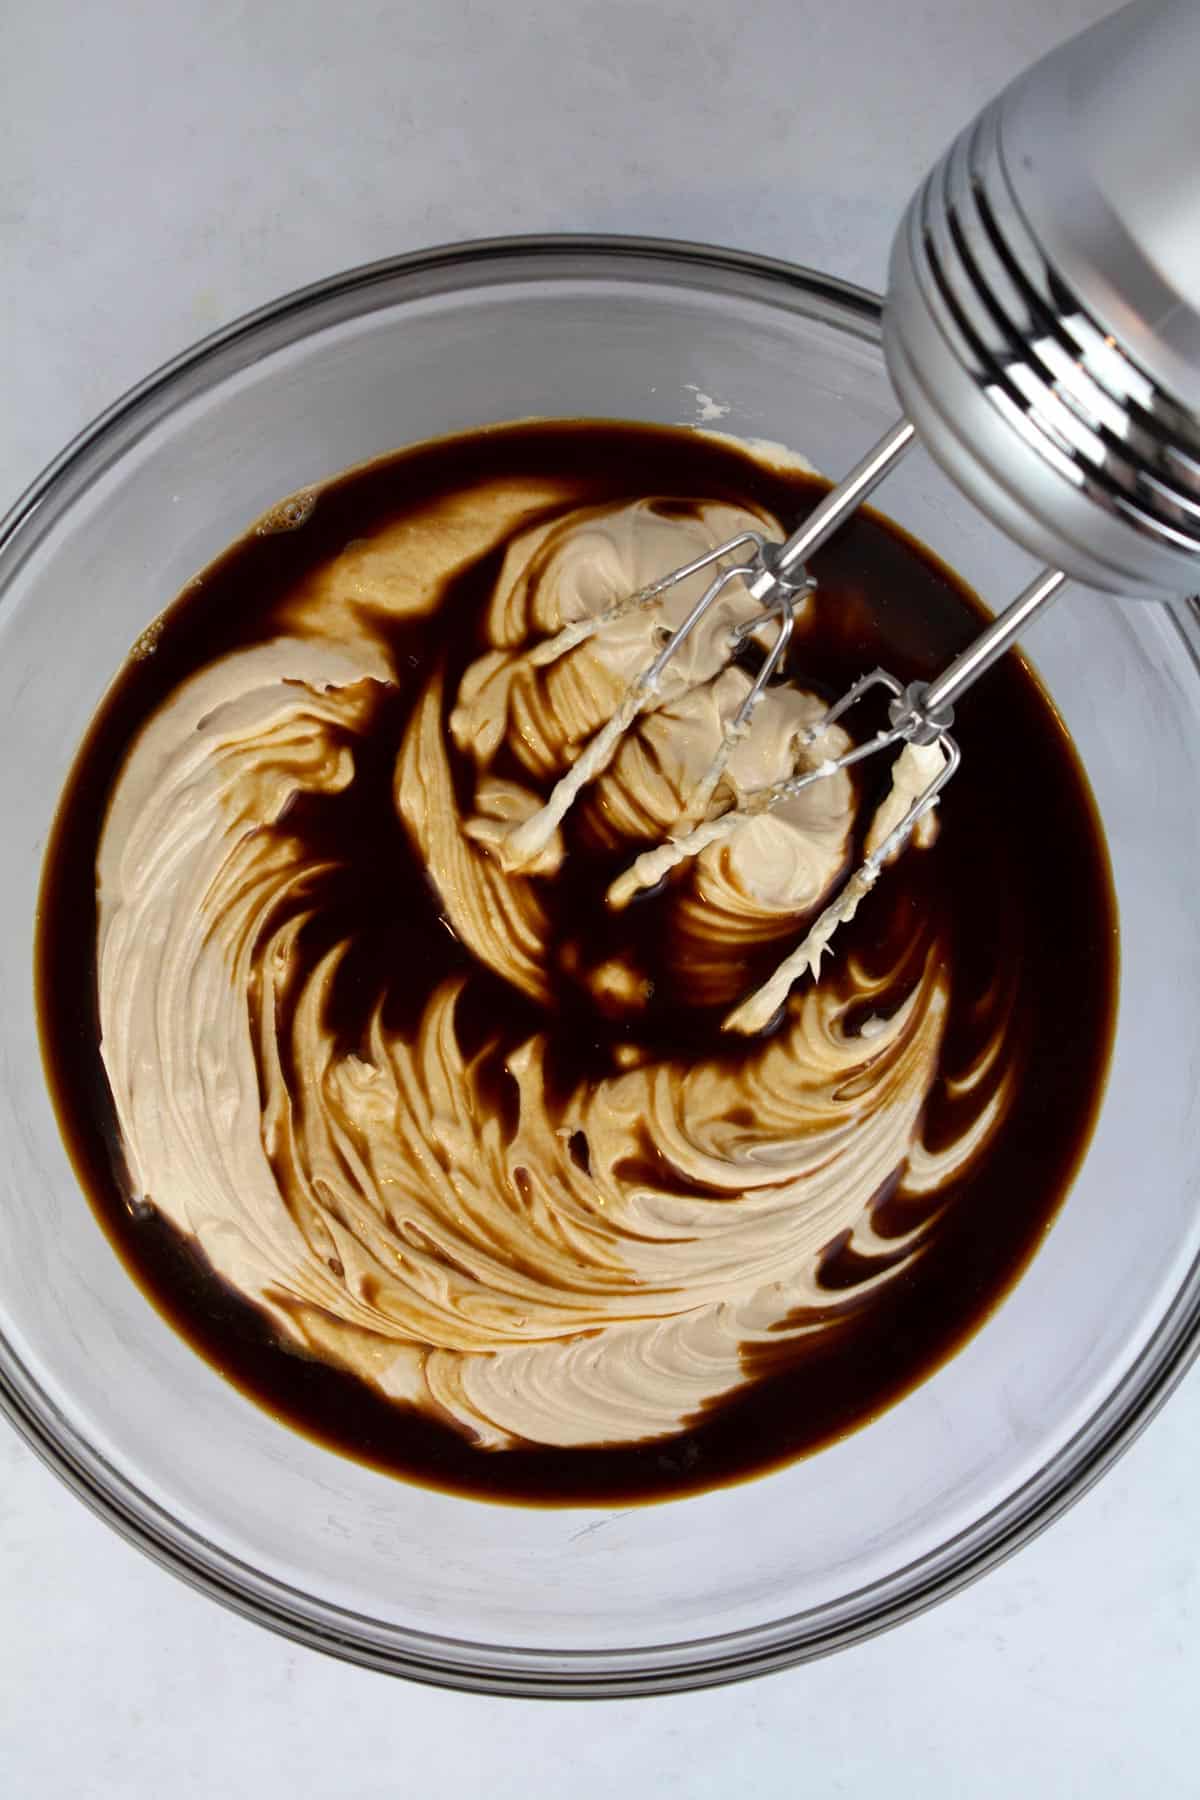 An overhead view of cheesecake batter in a clear glass bowl with espresso added on top and a hand mixer sitting in the back.